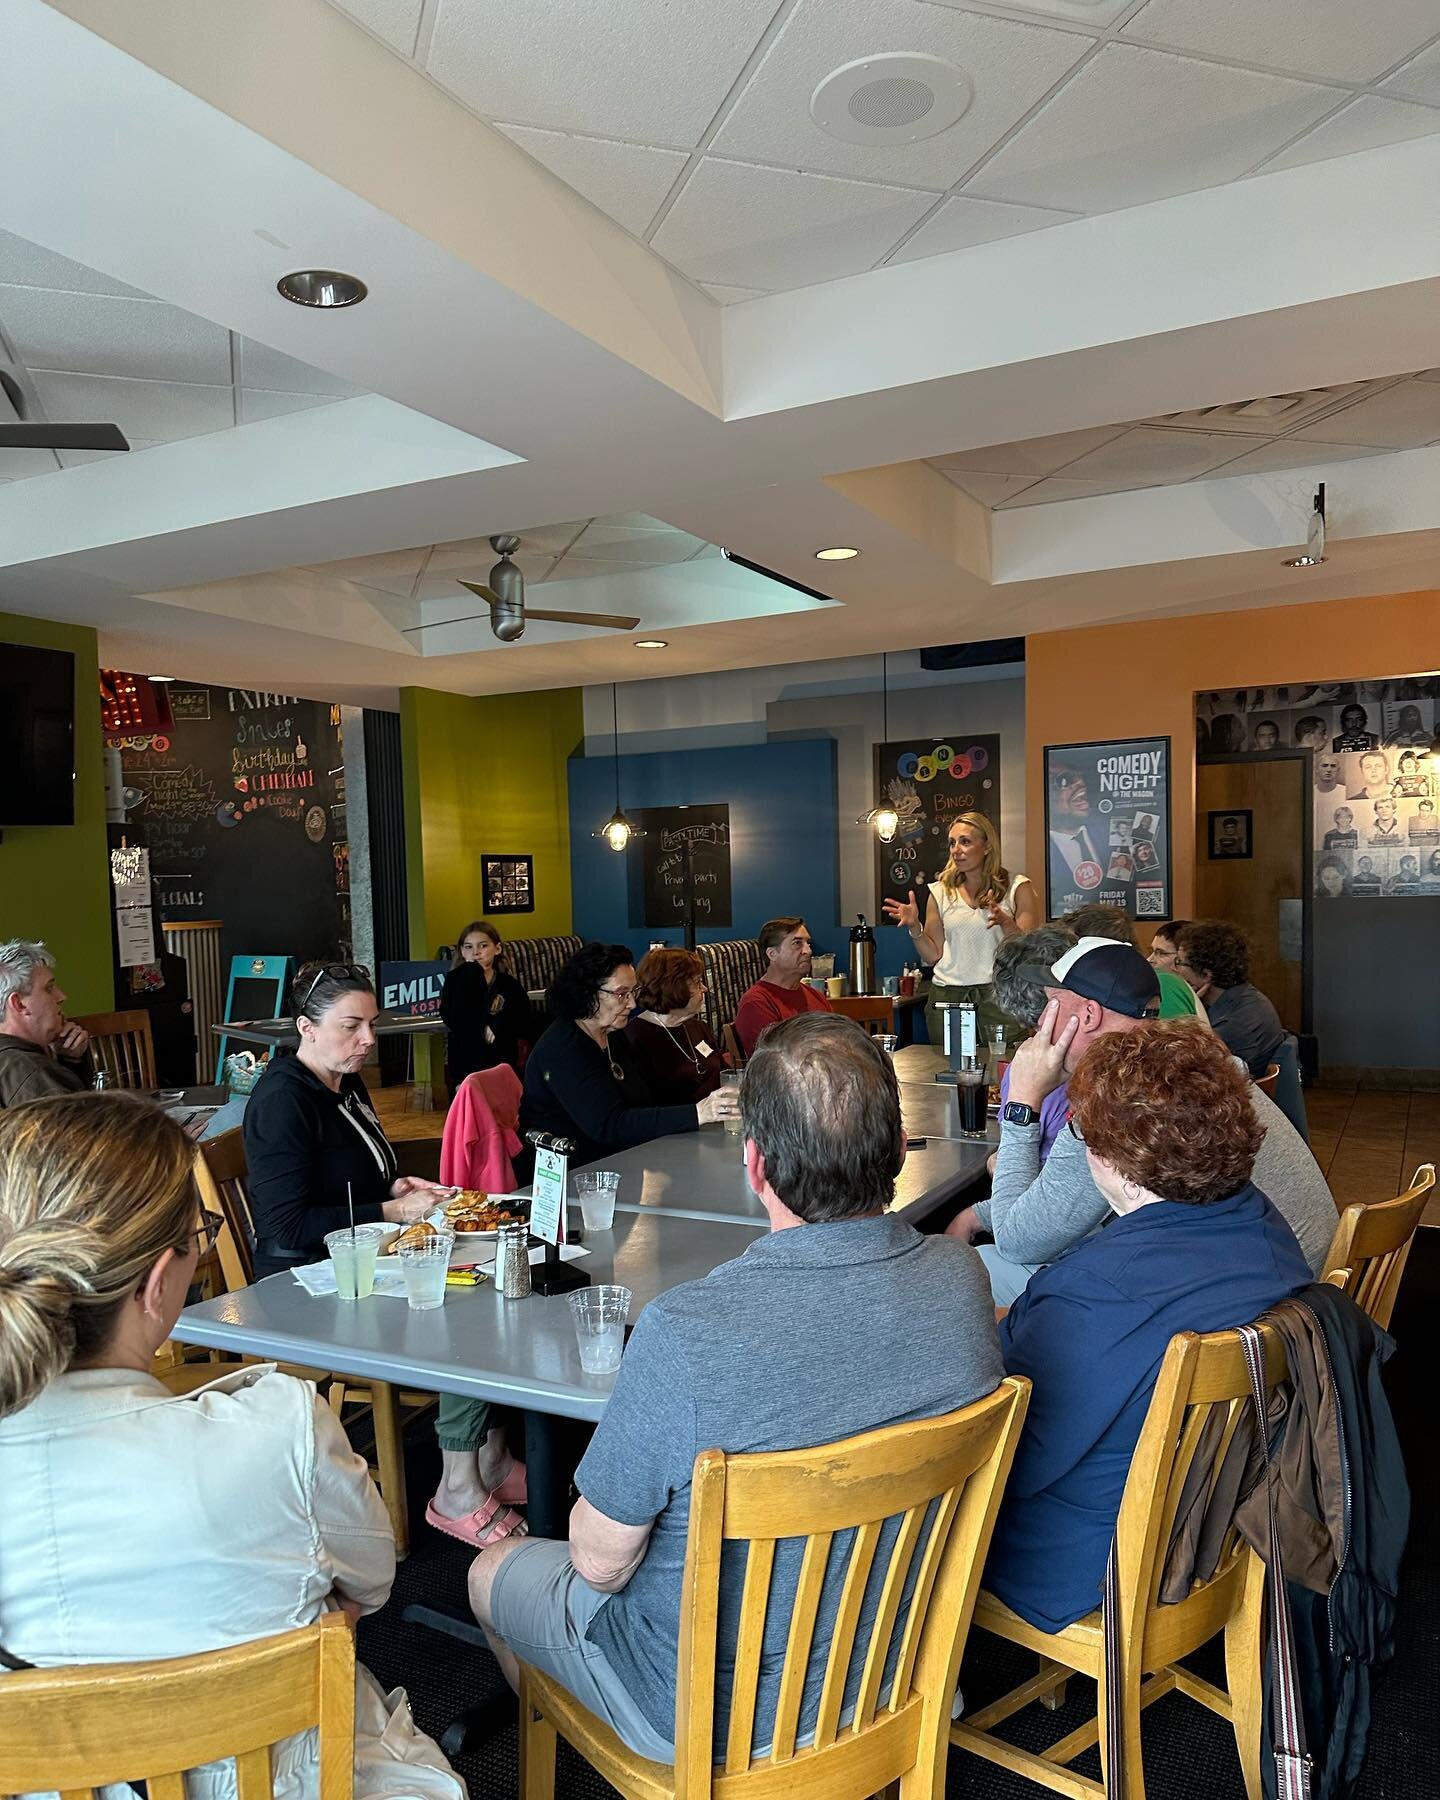 We had a fantastic turnout at our delegate meet and greet event today at Patty Wagon - thank you to all who came out! It was wonderful to connect, answer your questions, and hear your thoughts on the issues that matter most. Can't wait to see you all